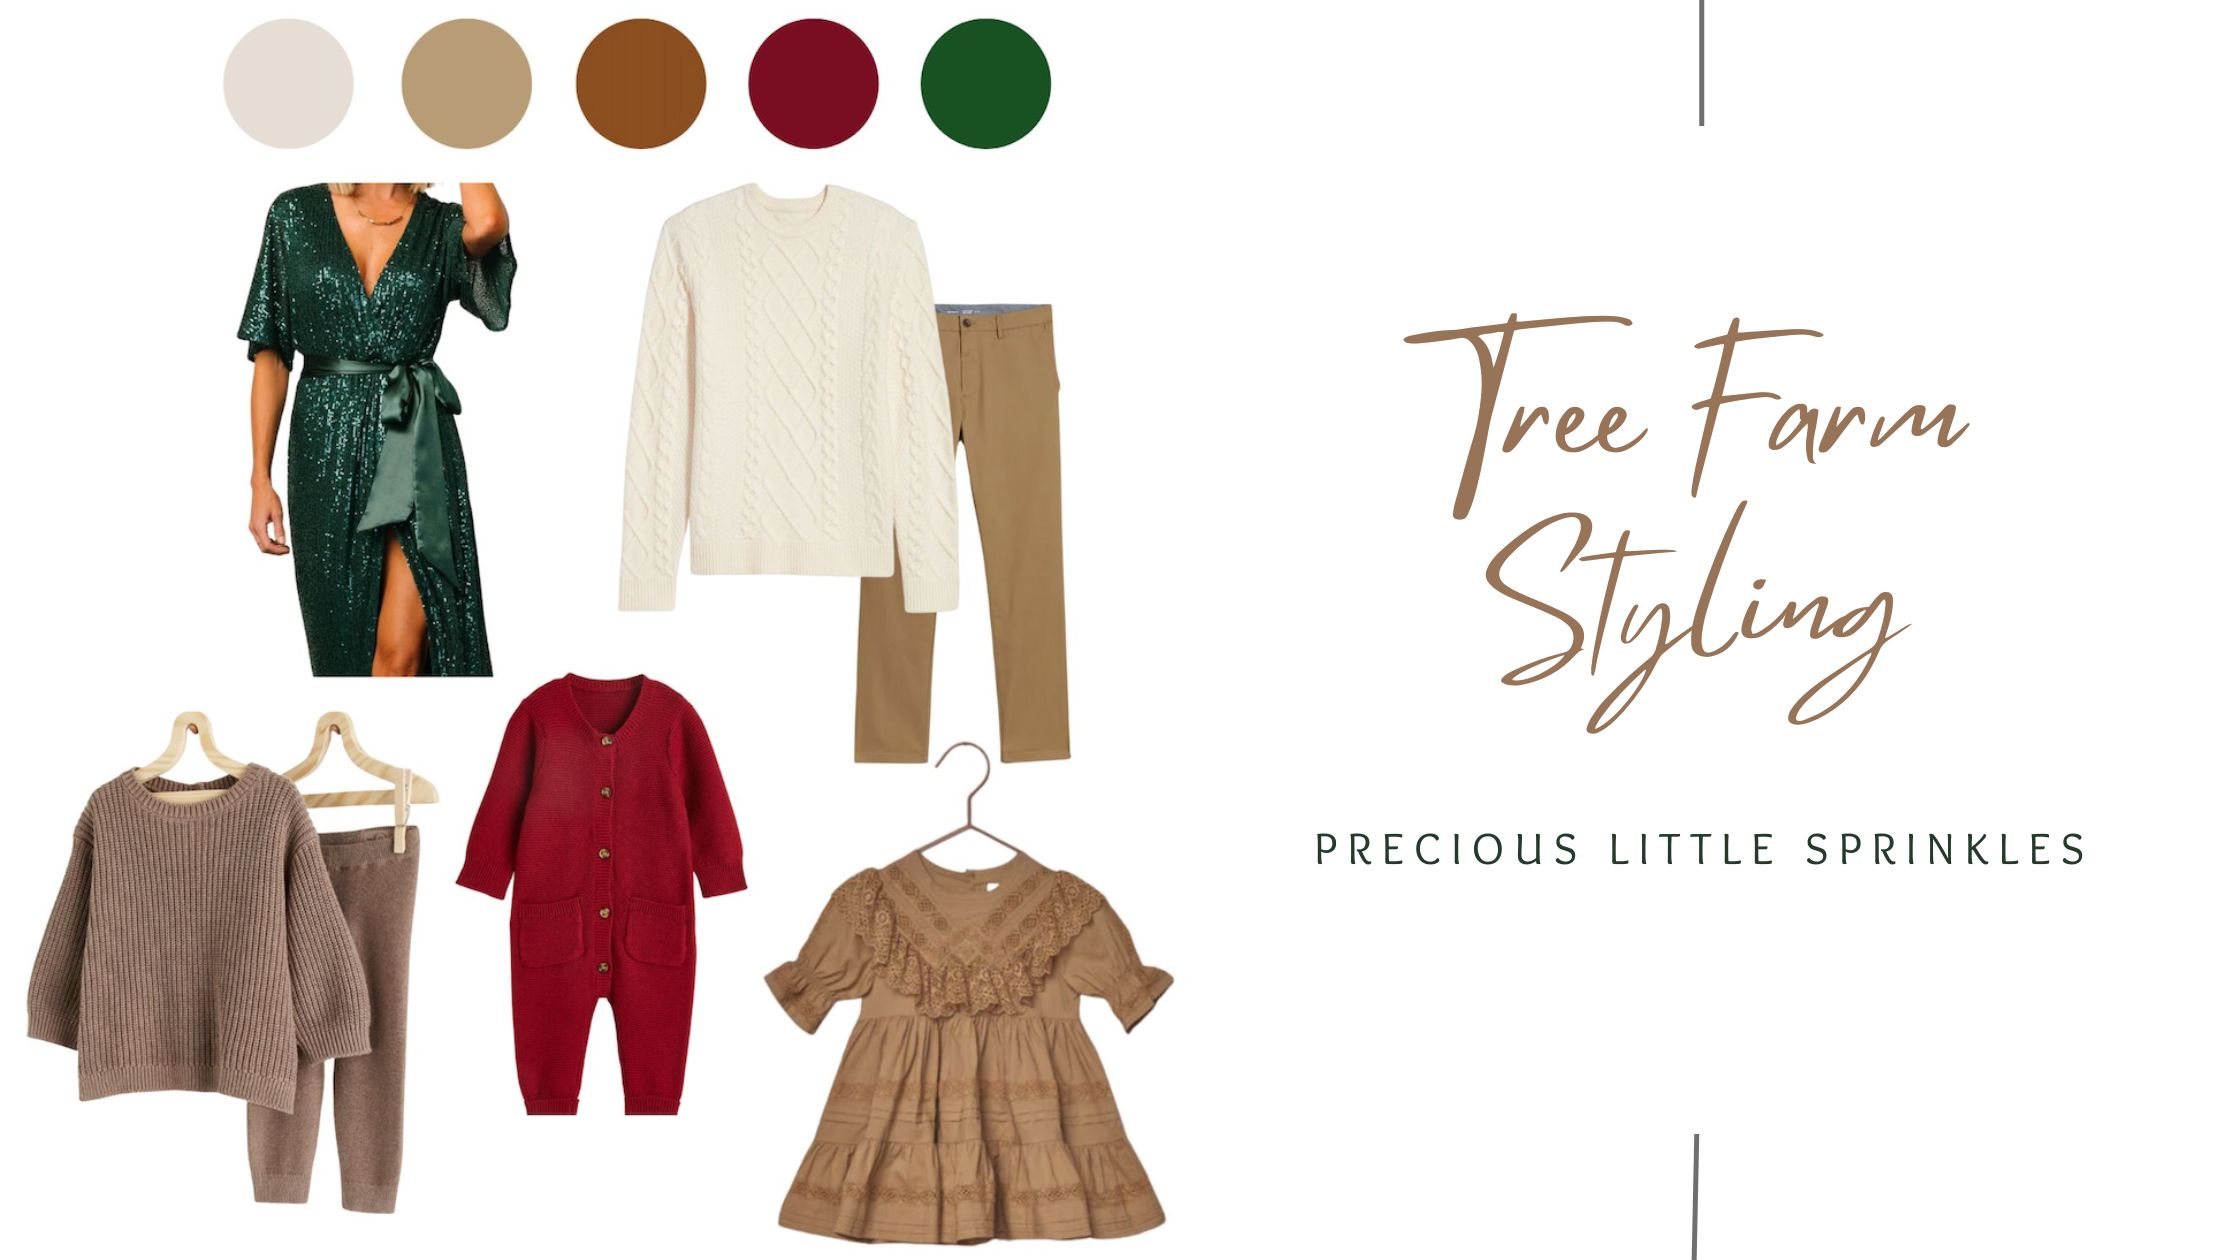 5 Styled Looks for your Tree Farm Family Session